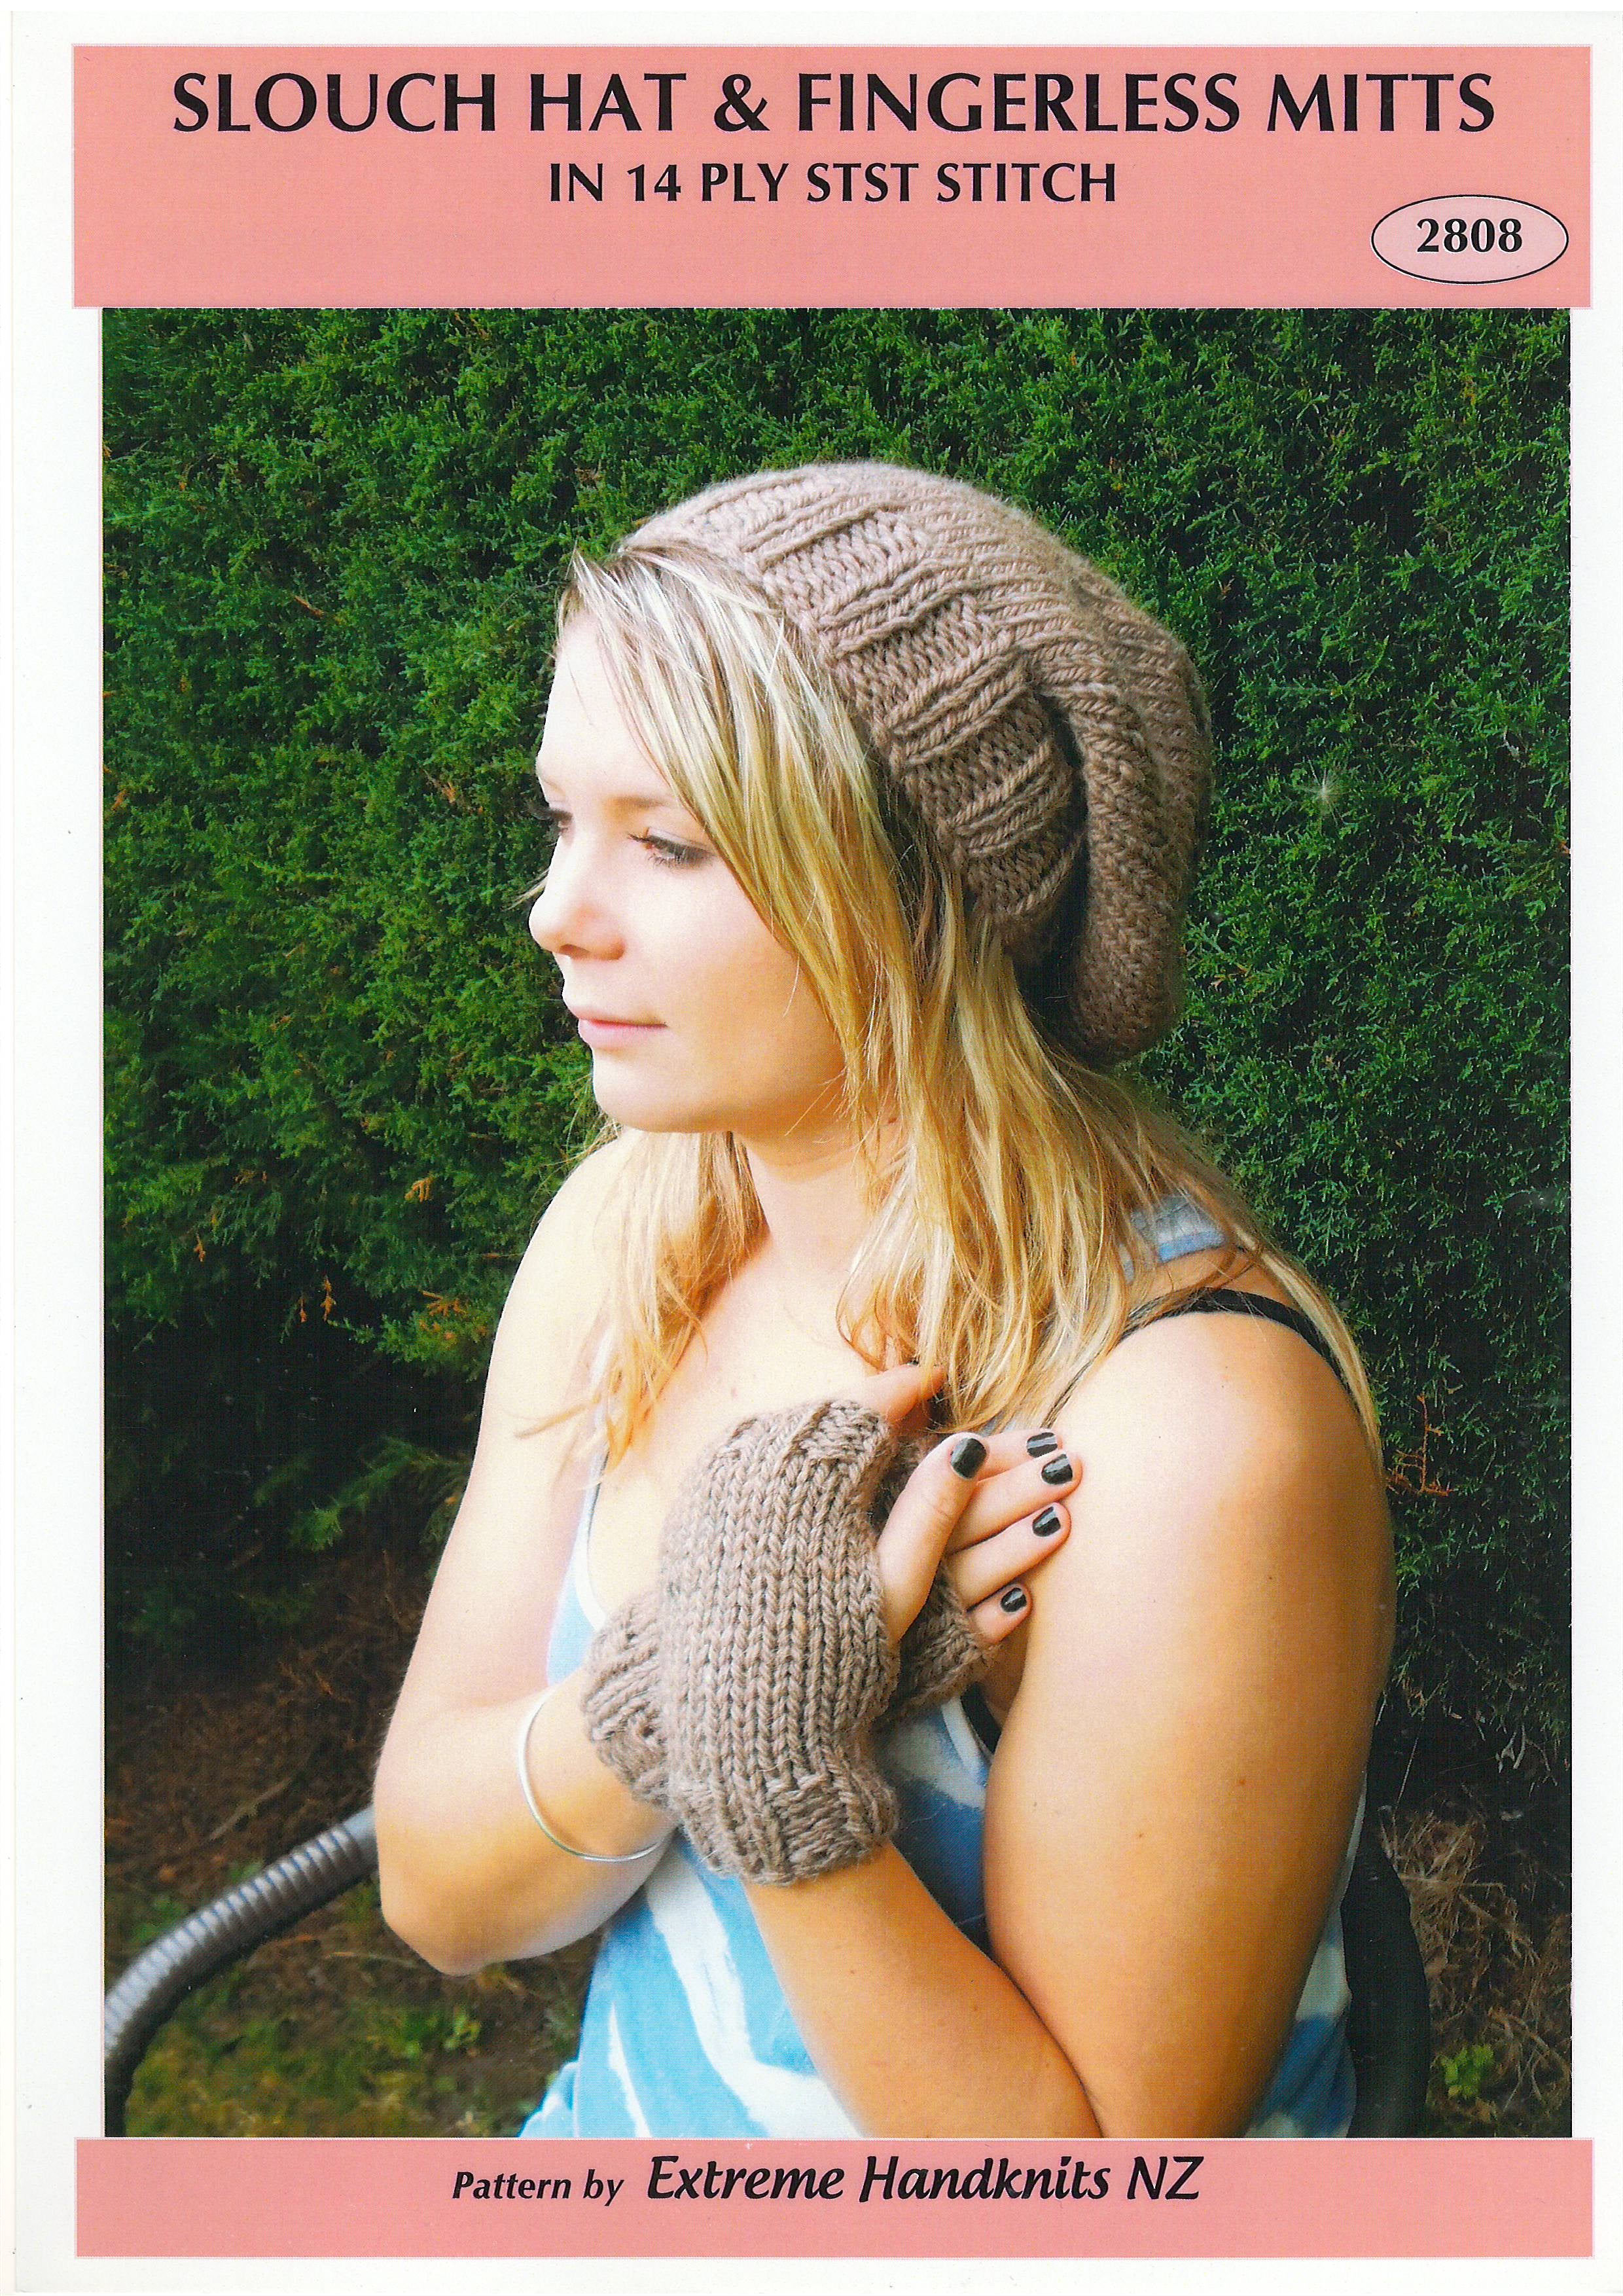 Extreme Handknits NZ- Slouch Hat & Fingerless Mitts